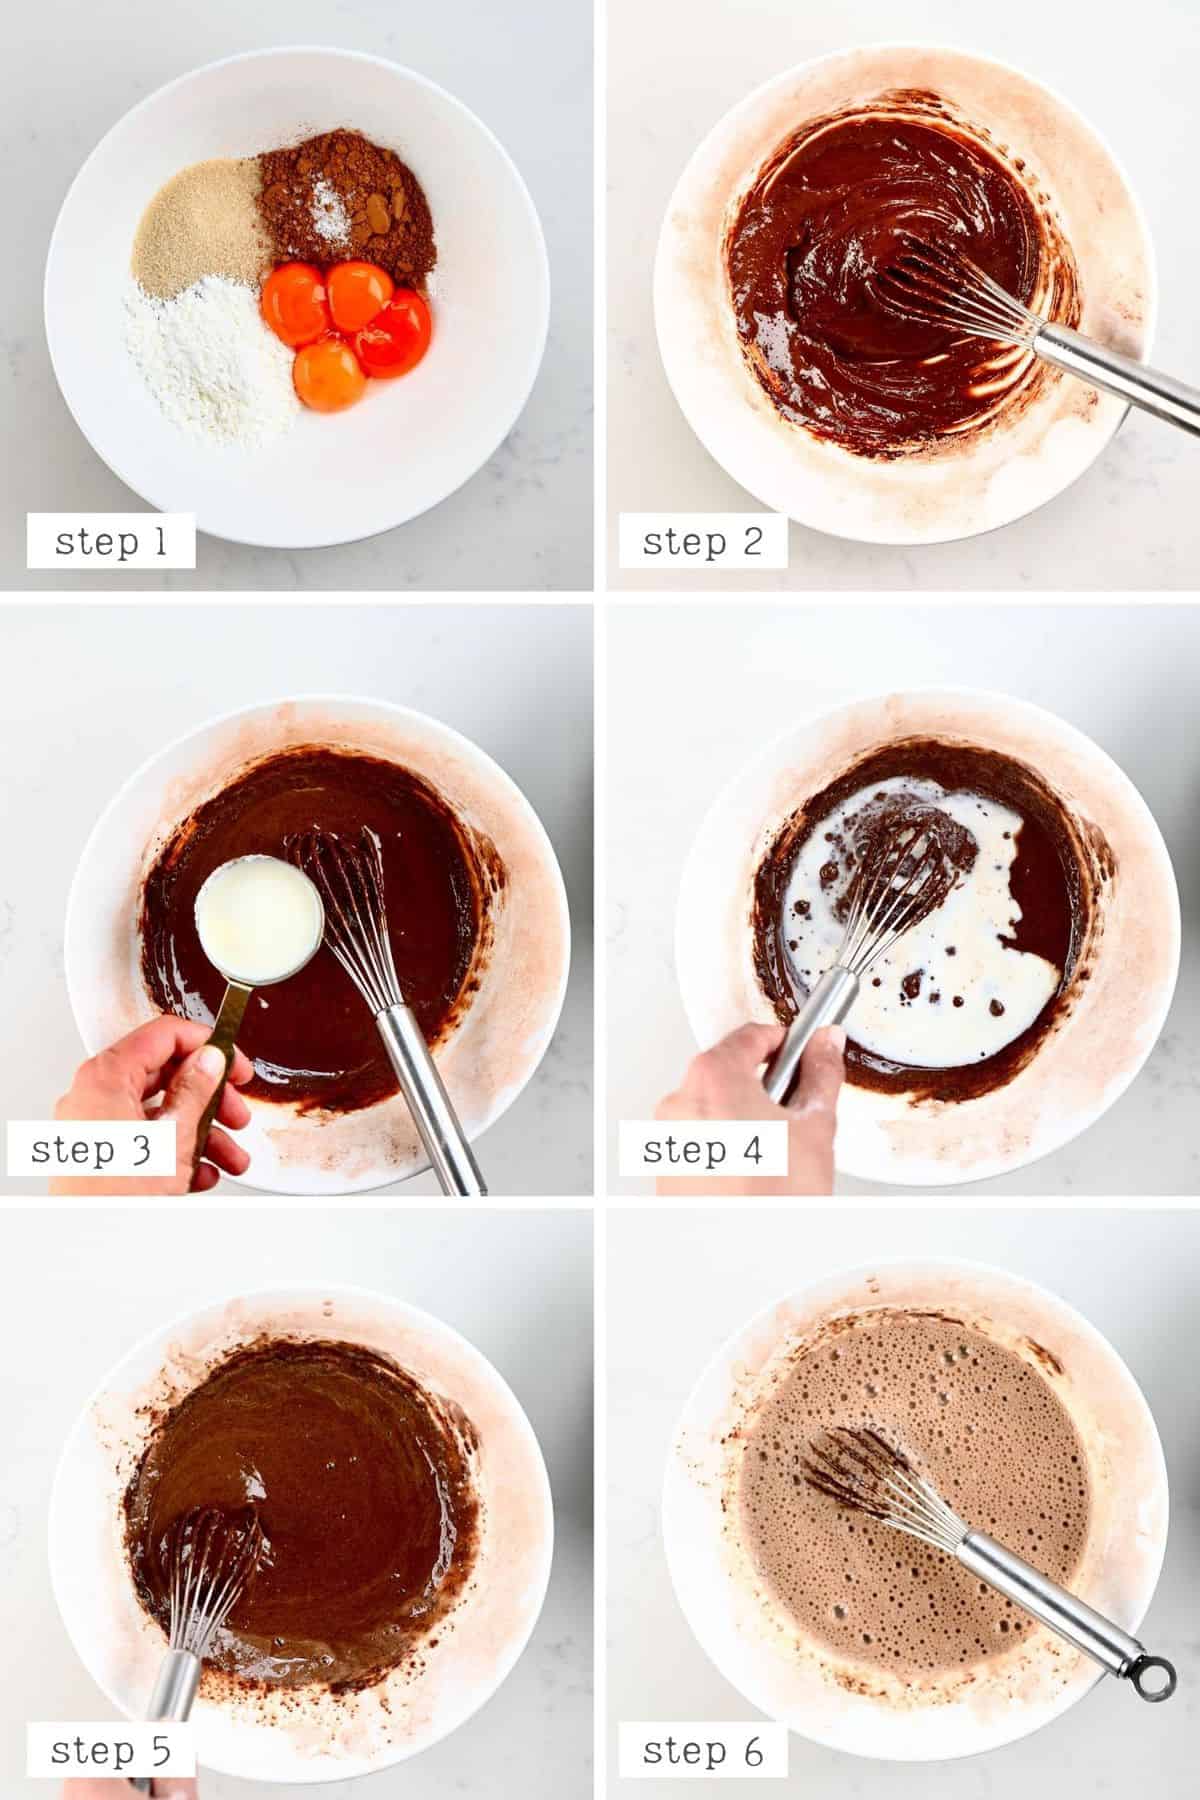 Steps for mixing chocolate cream